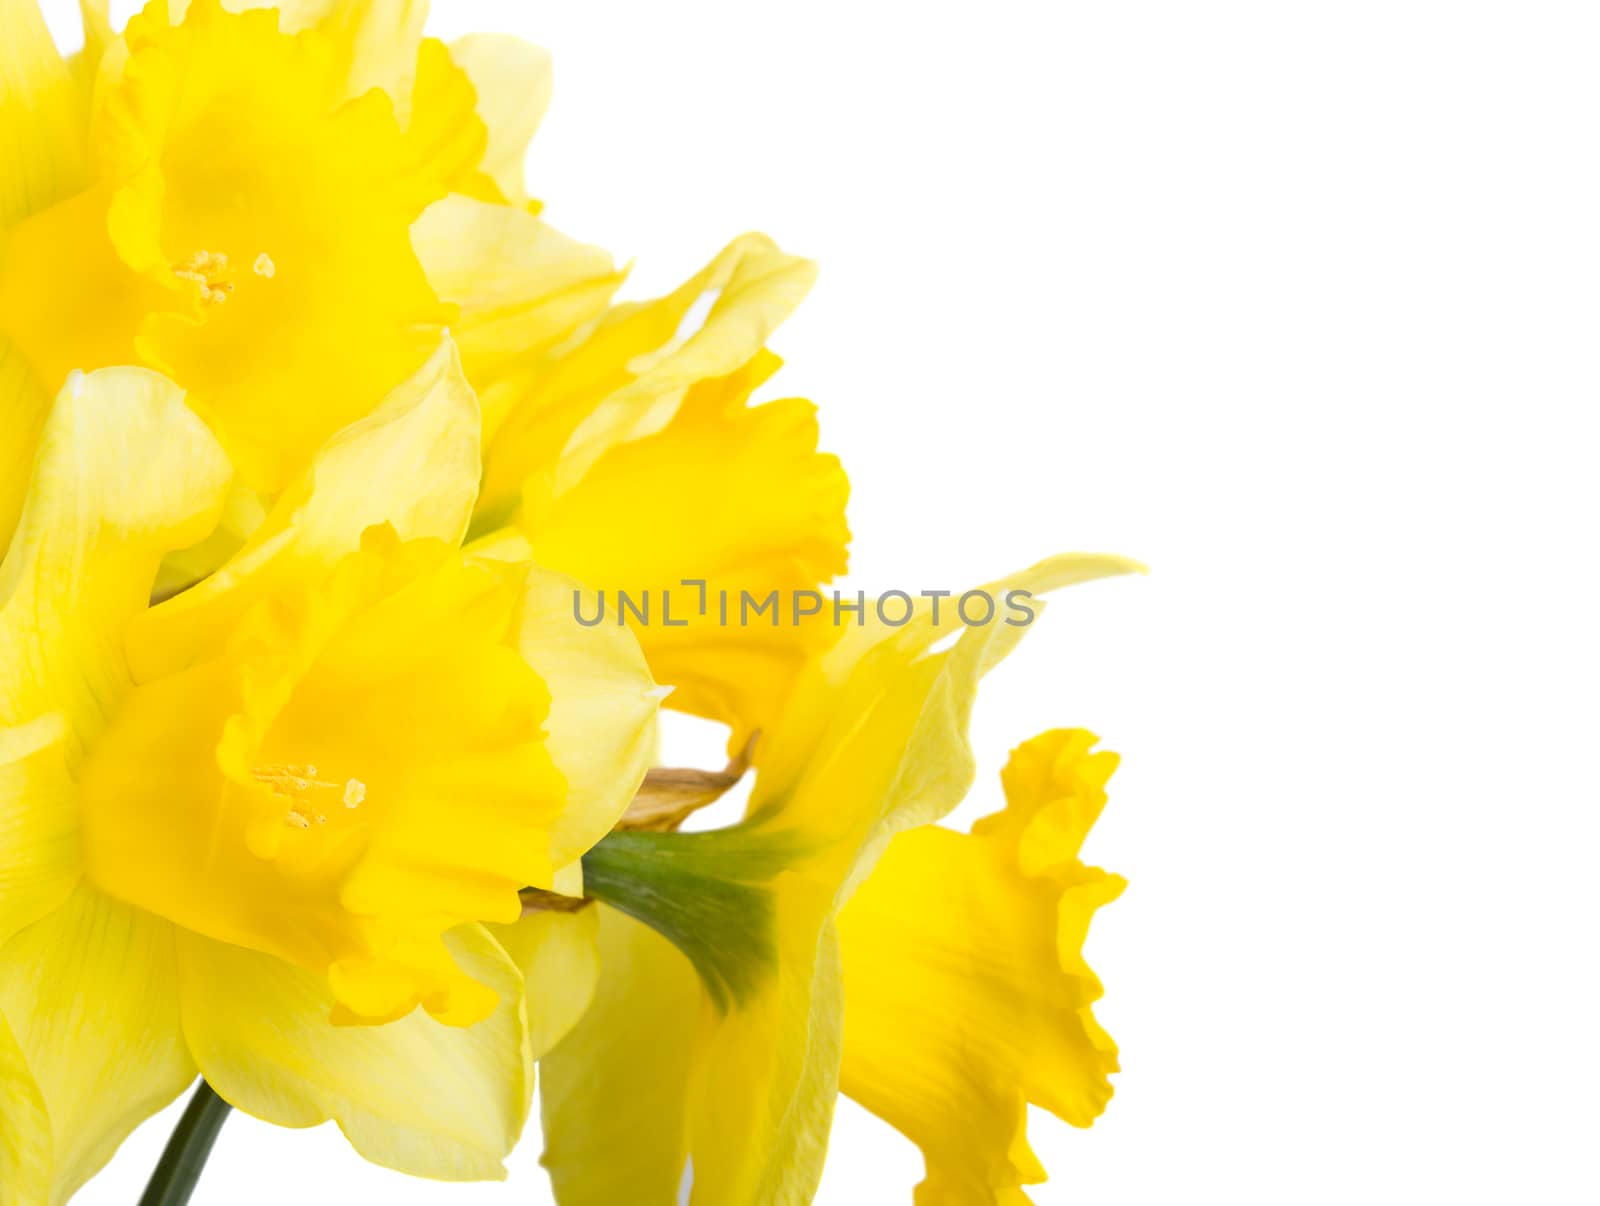 Spring flowers narcissus isolated on white background